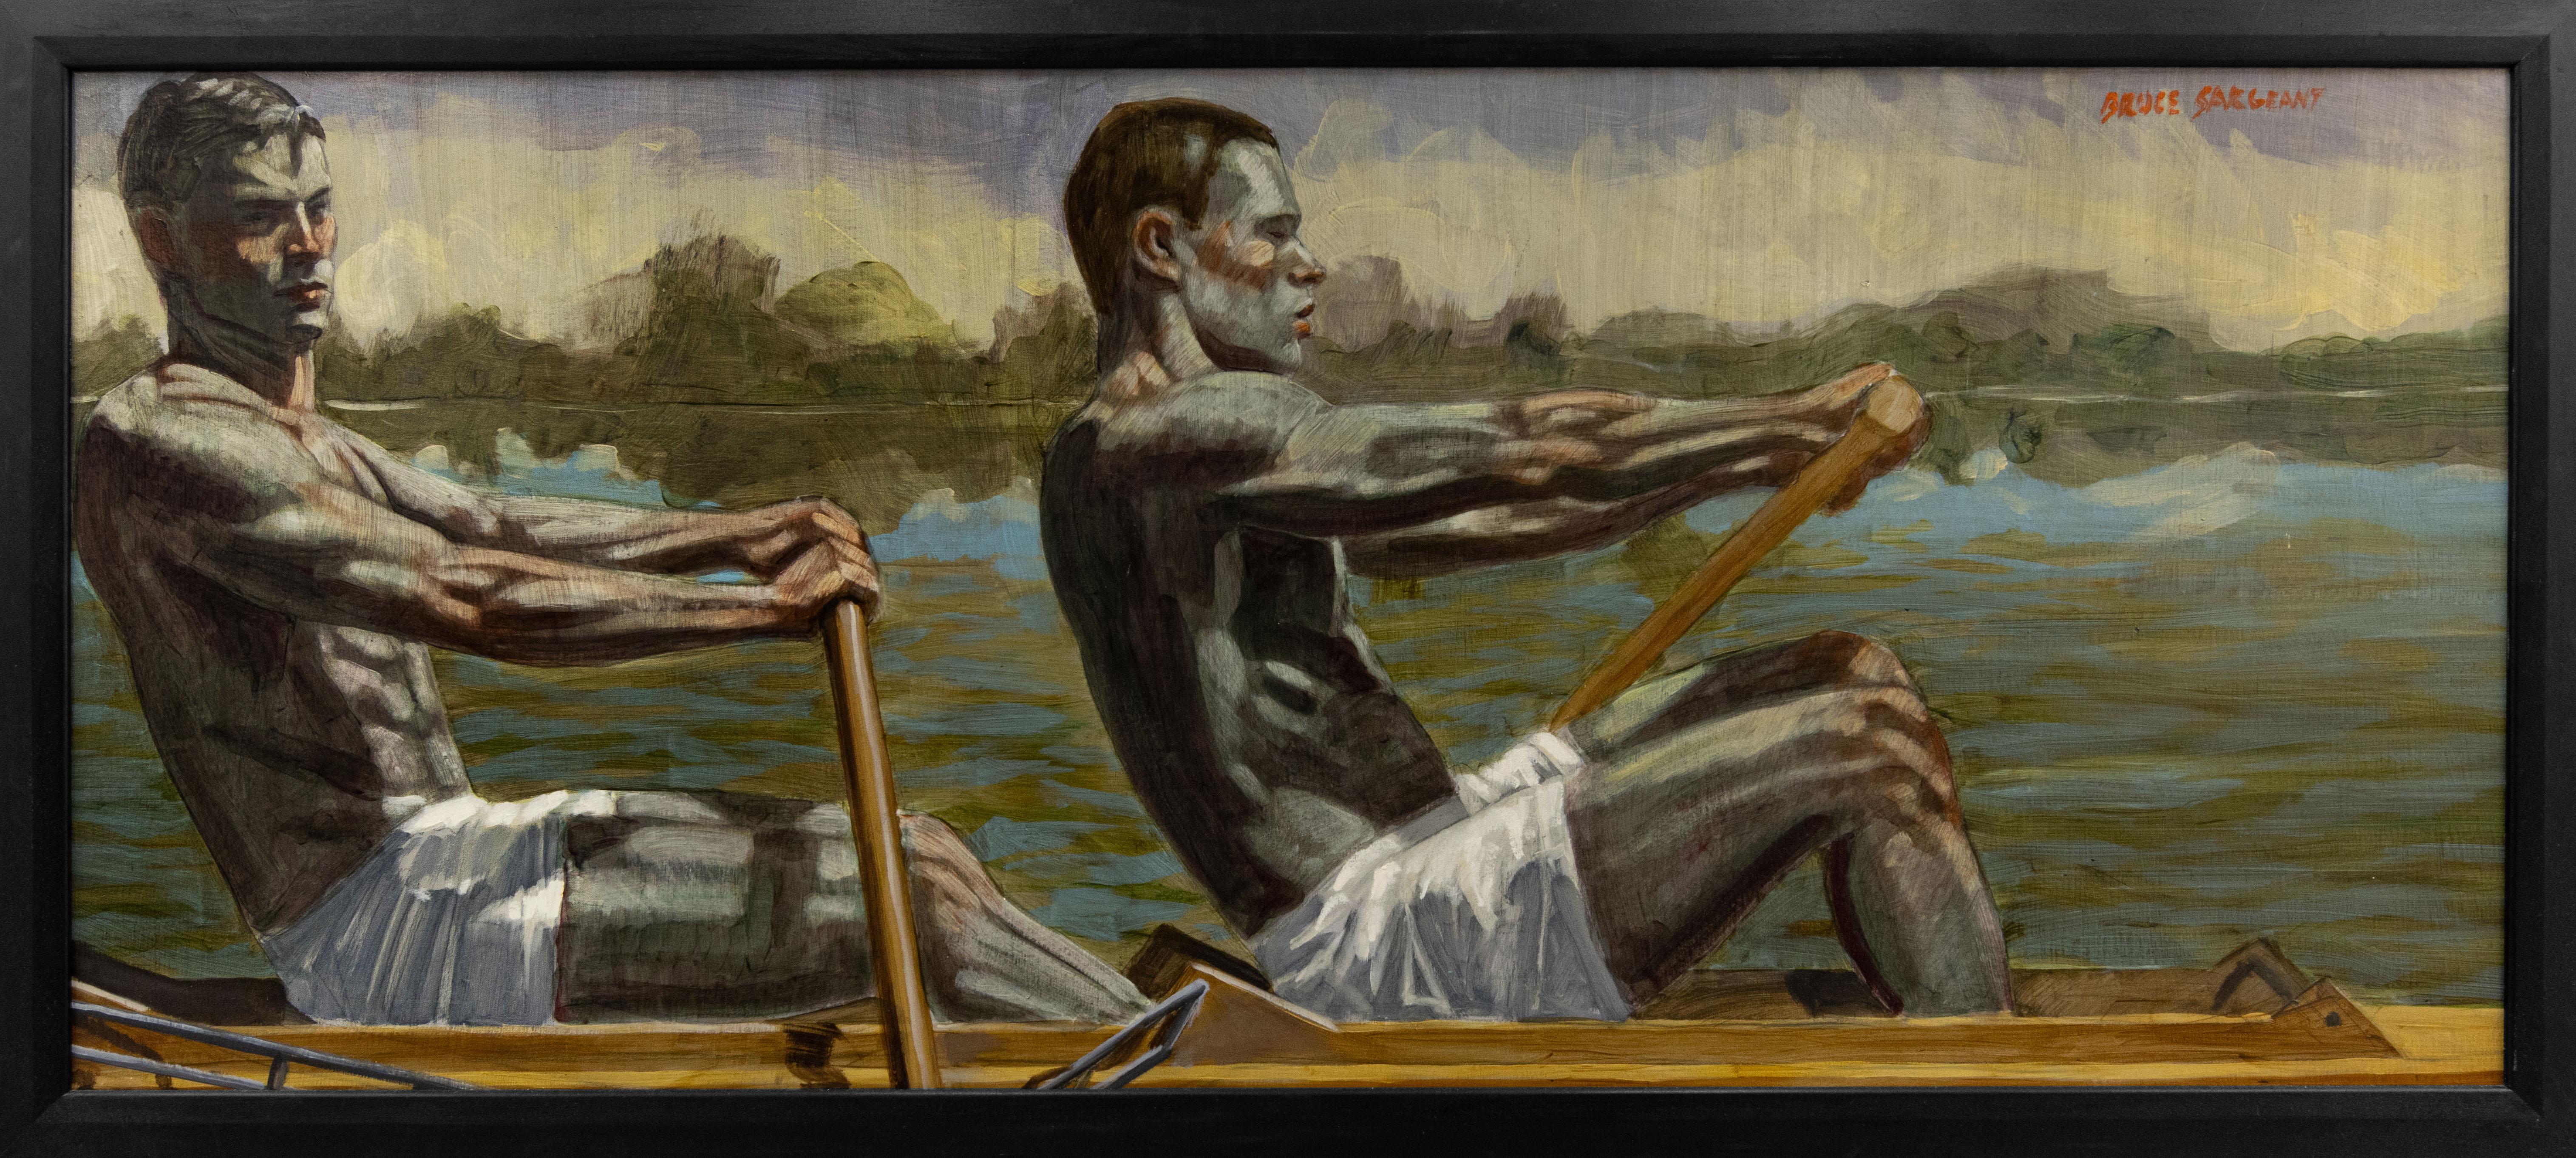 [Bruce Sargeant (1898-1938)] Two Rowers - Painting by Mark Beard